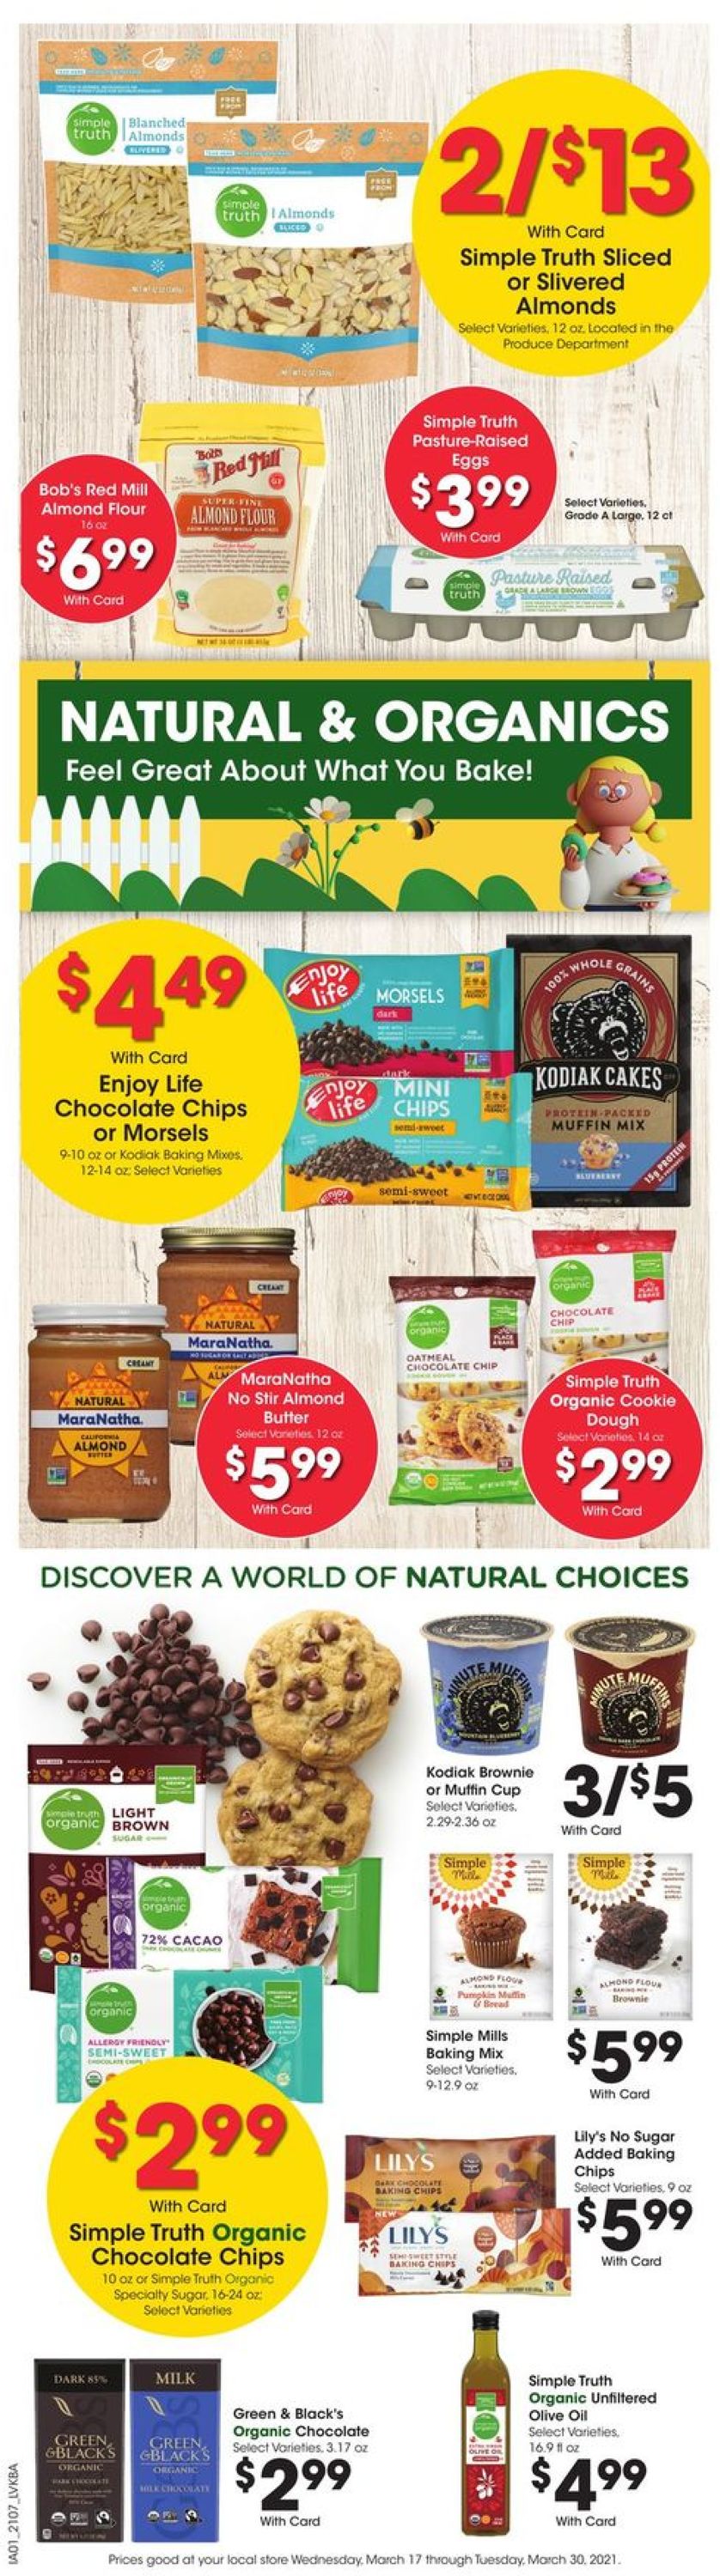 Jay C Food Stores Ad from 03/24/2021